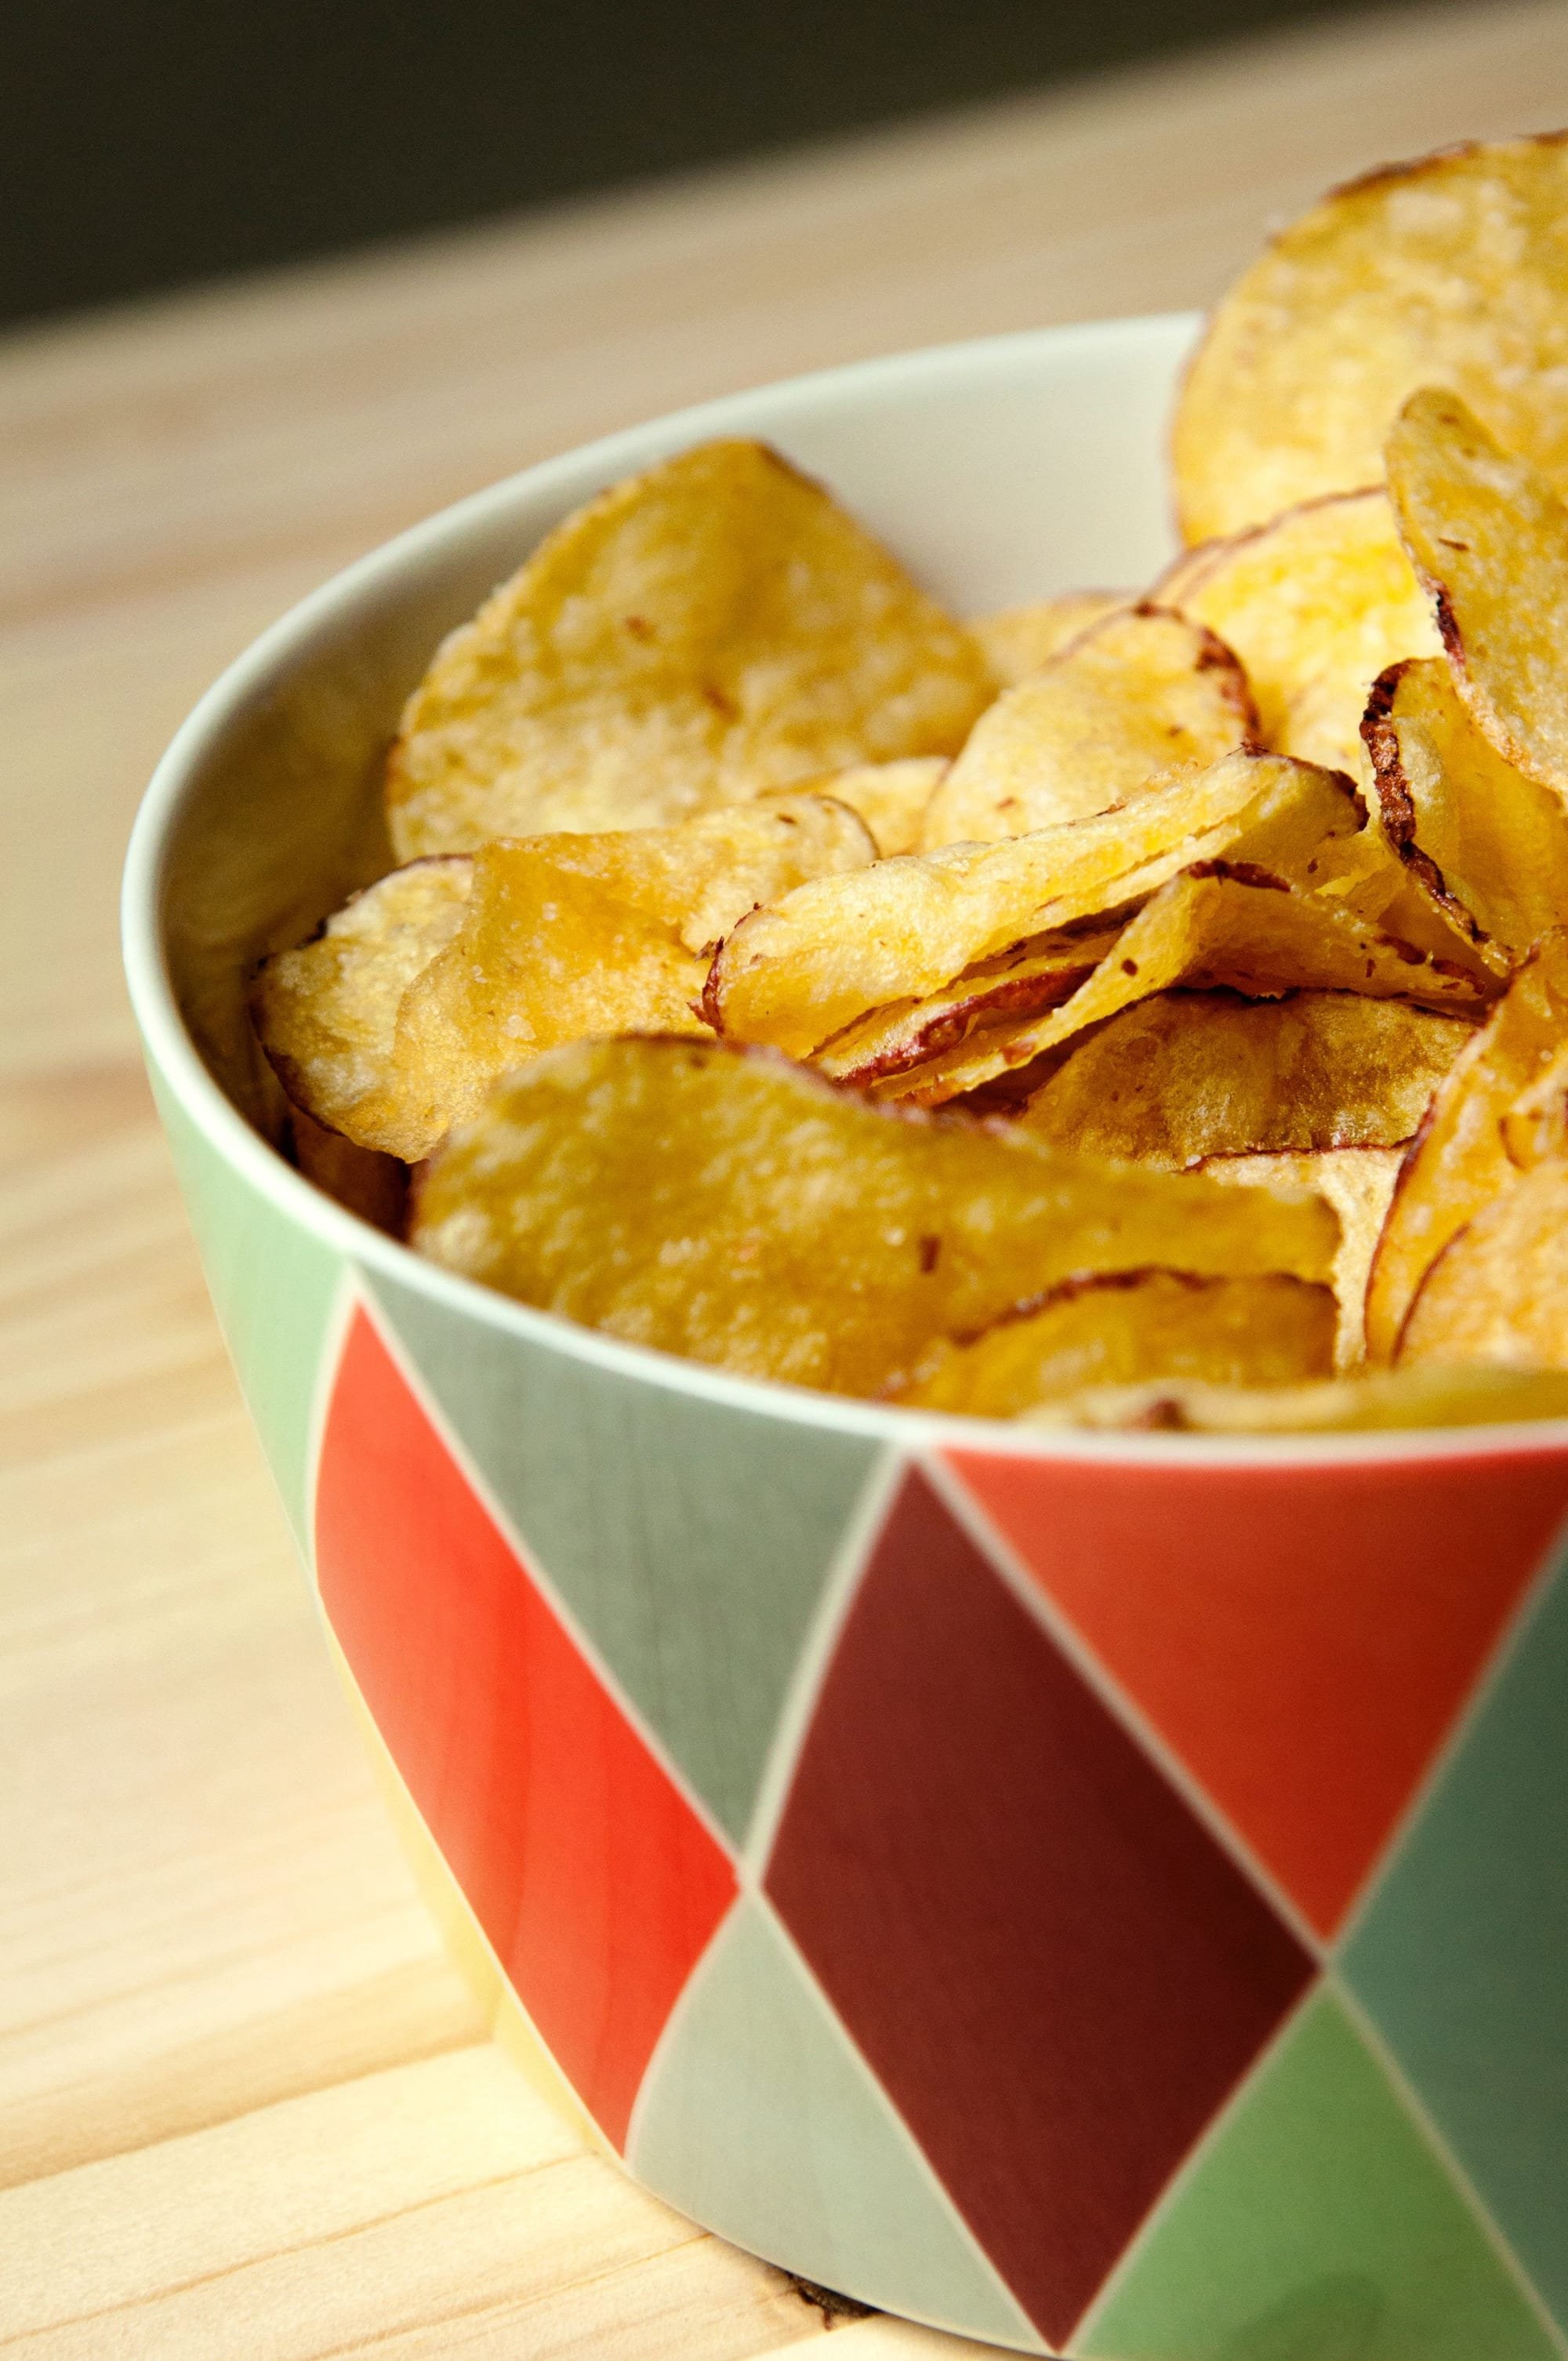 Real crisps allergens and ingredients